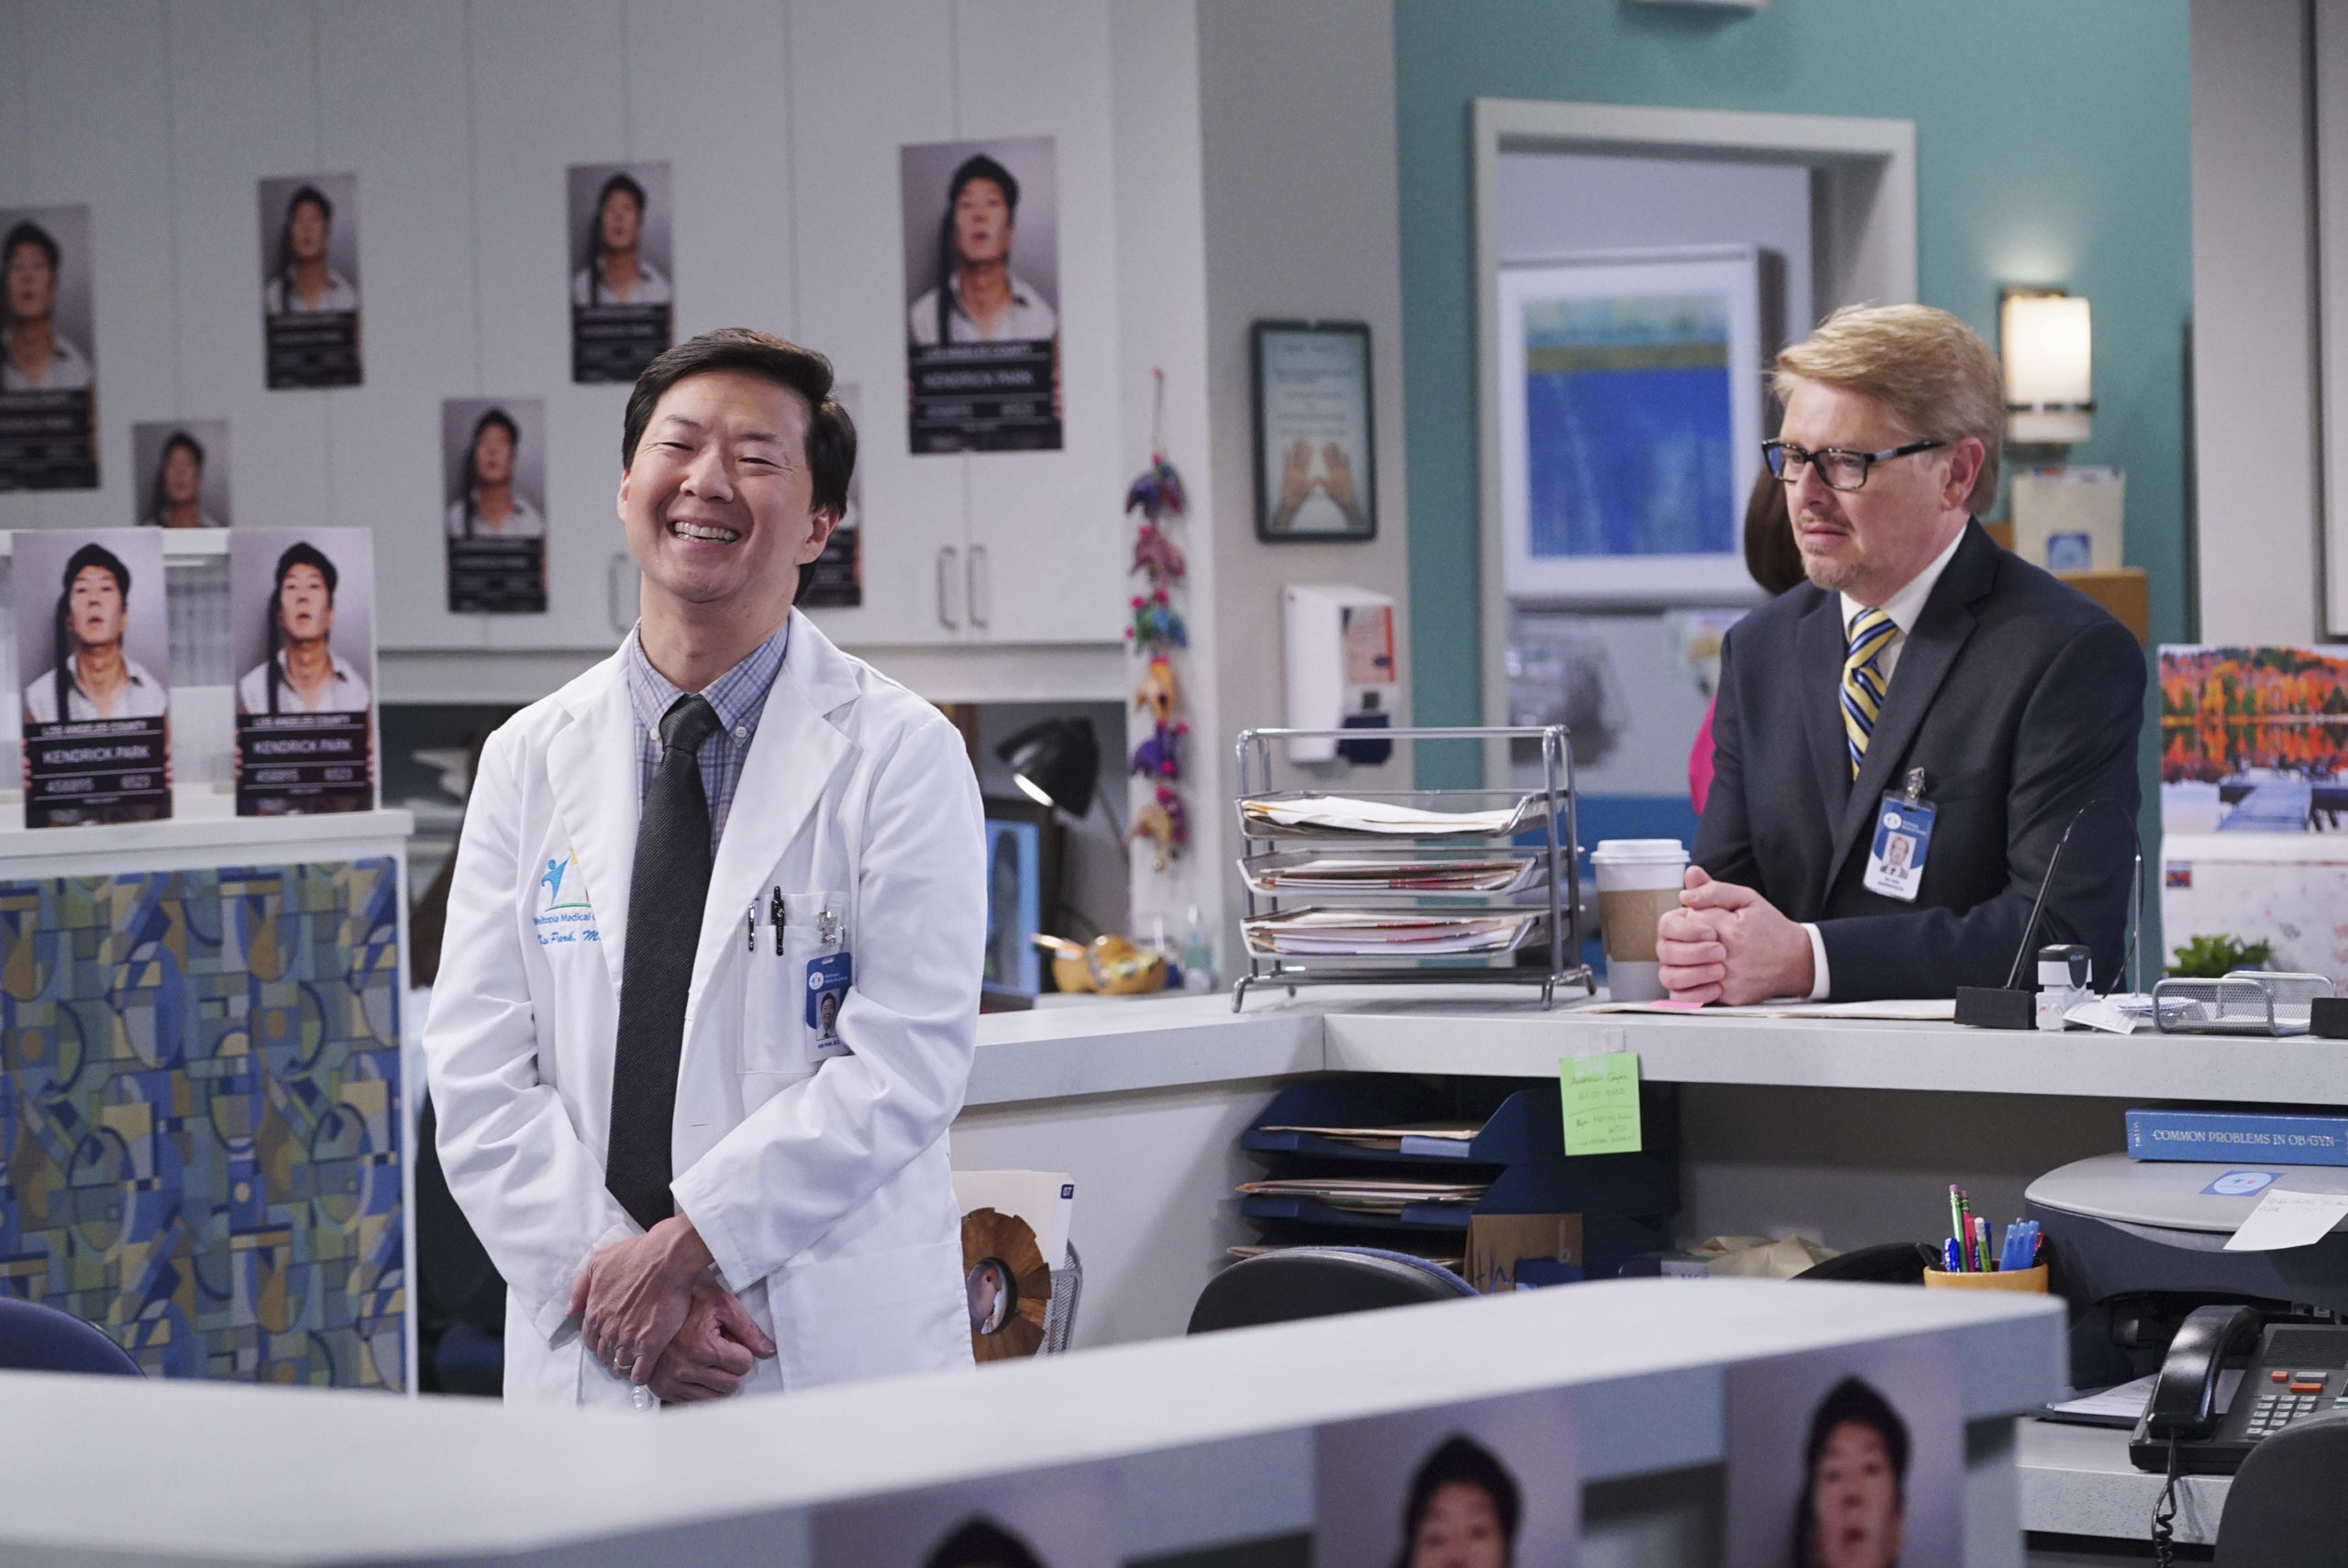 Ken Jeong and Dave Foley in Dr. Ken